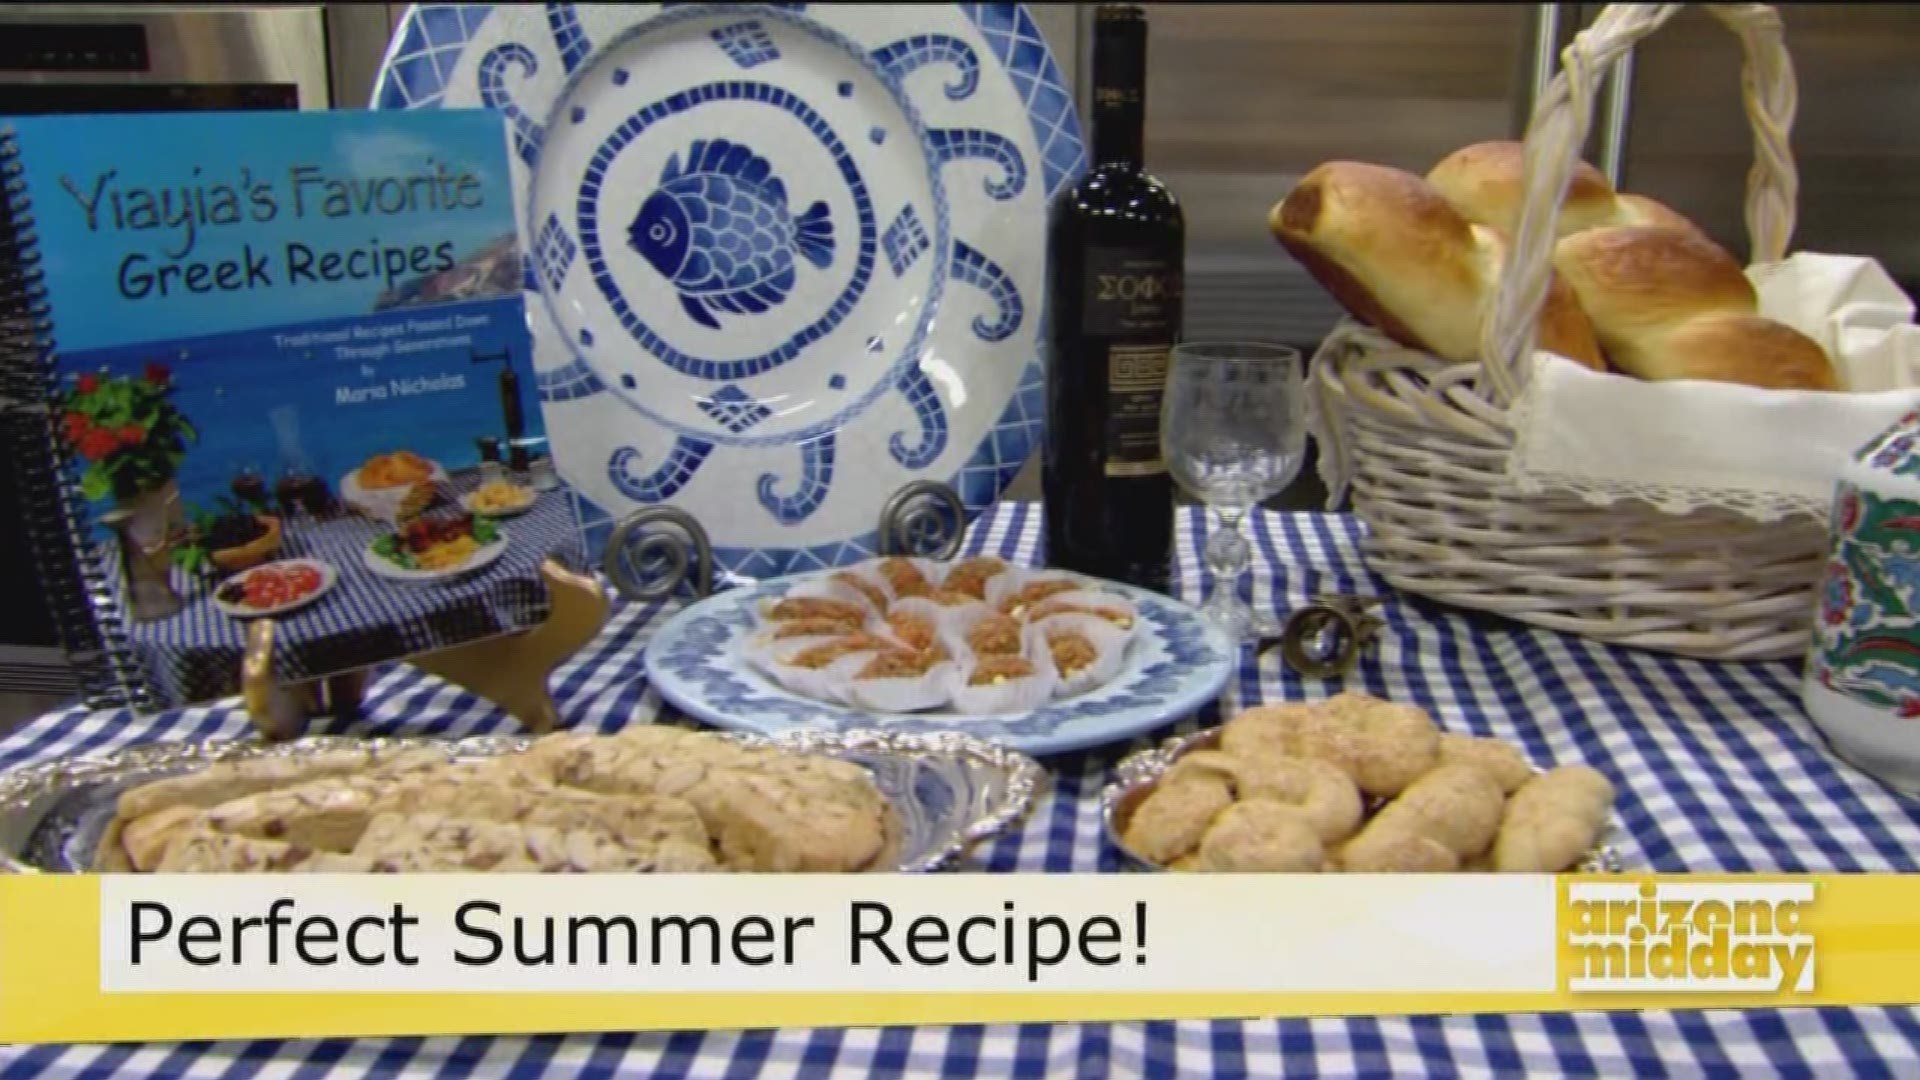 Maria Nicholas from Cooking with Yiayia joins us to share some traditional Greek dishes.